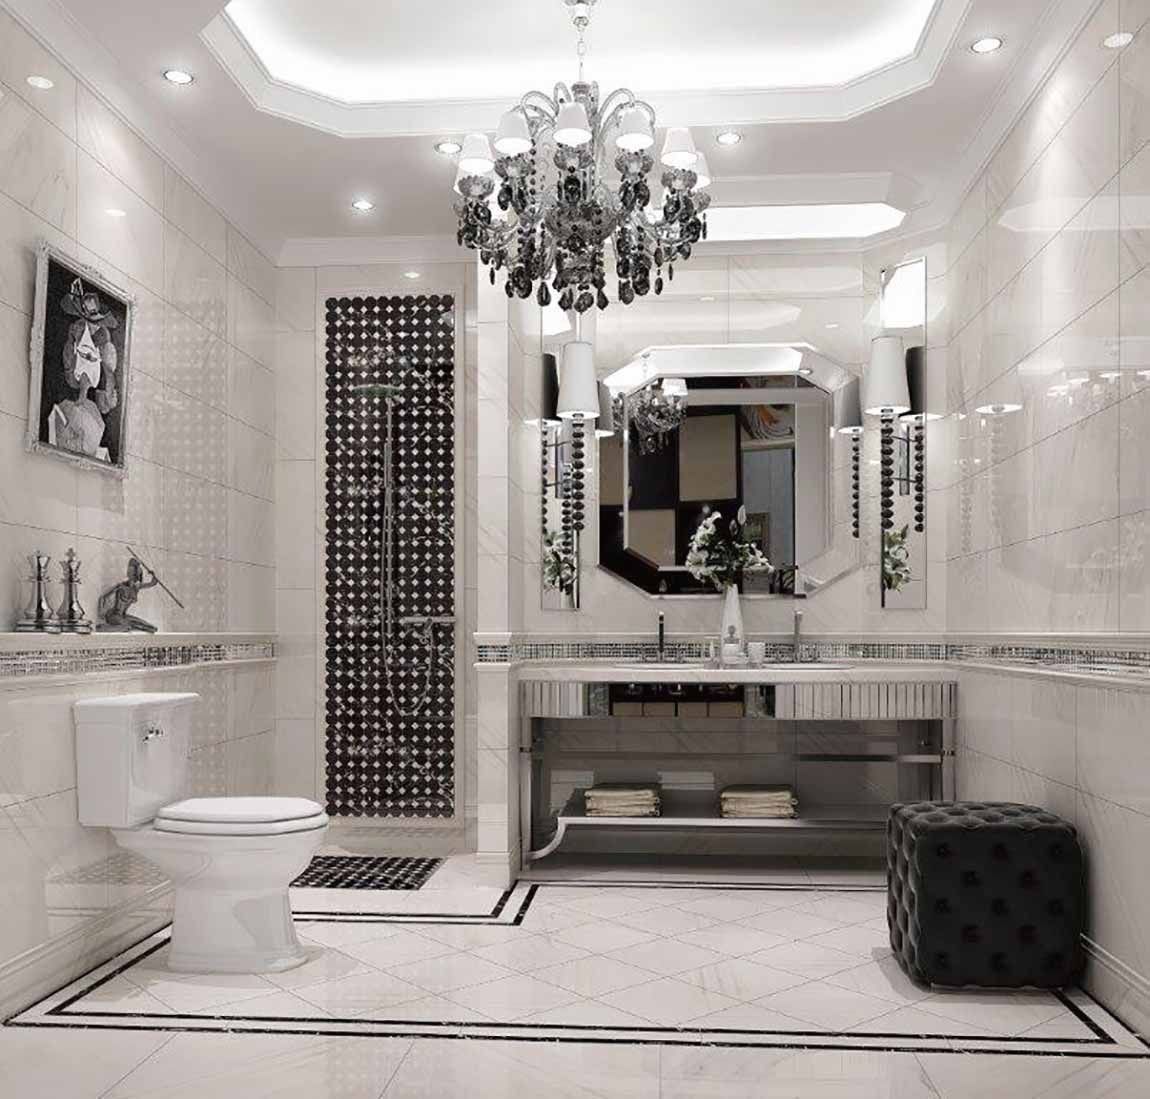 If you want to capture Hollywood glam in a master bathroom, keep shine